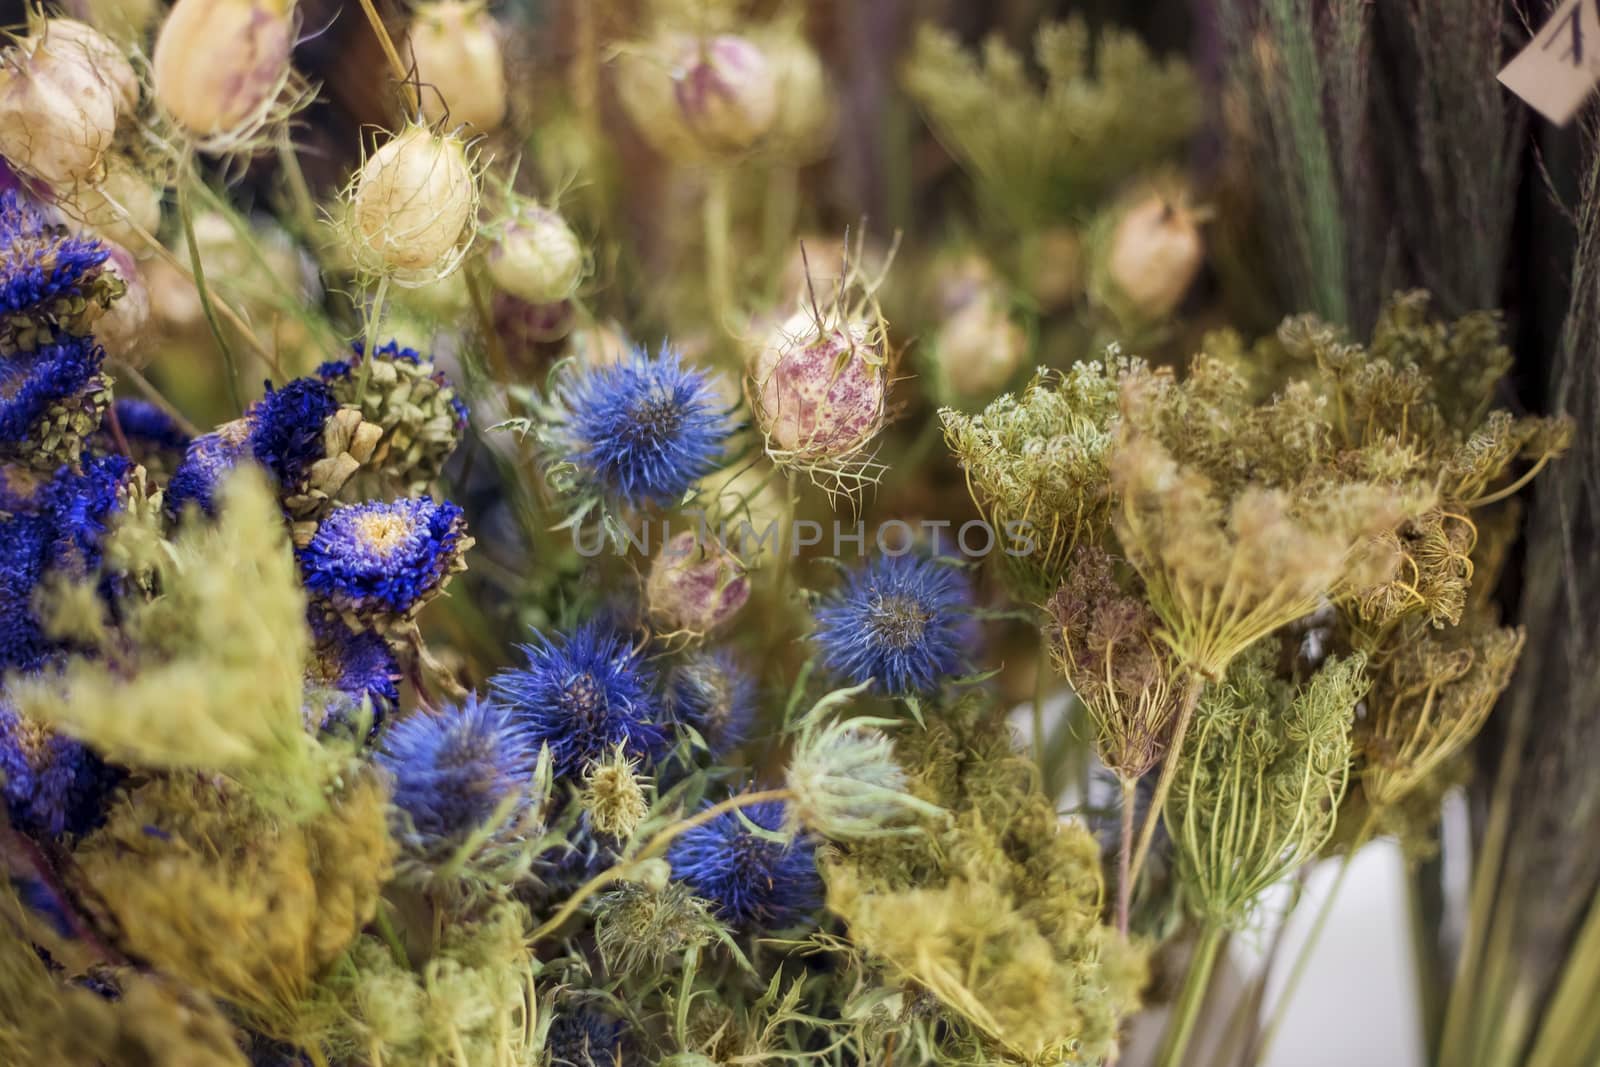 A bouquet of dried meadow plants and flowers for home decoration by galinasharapova